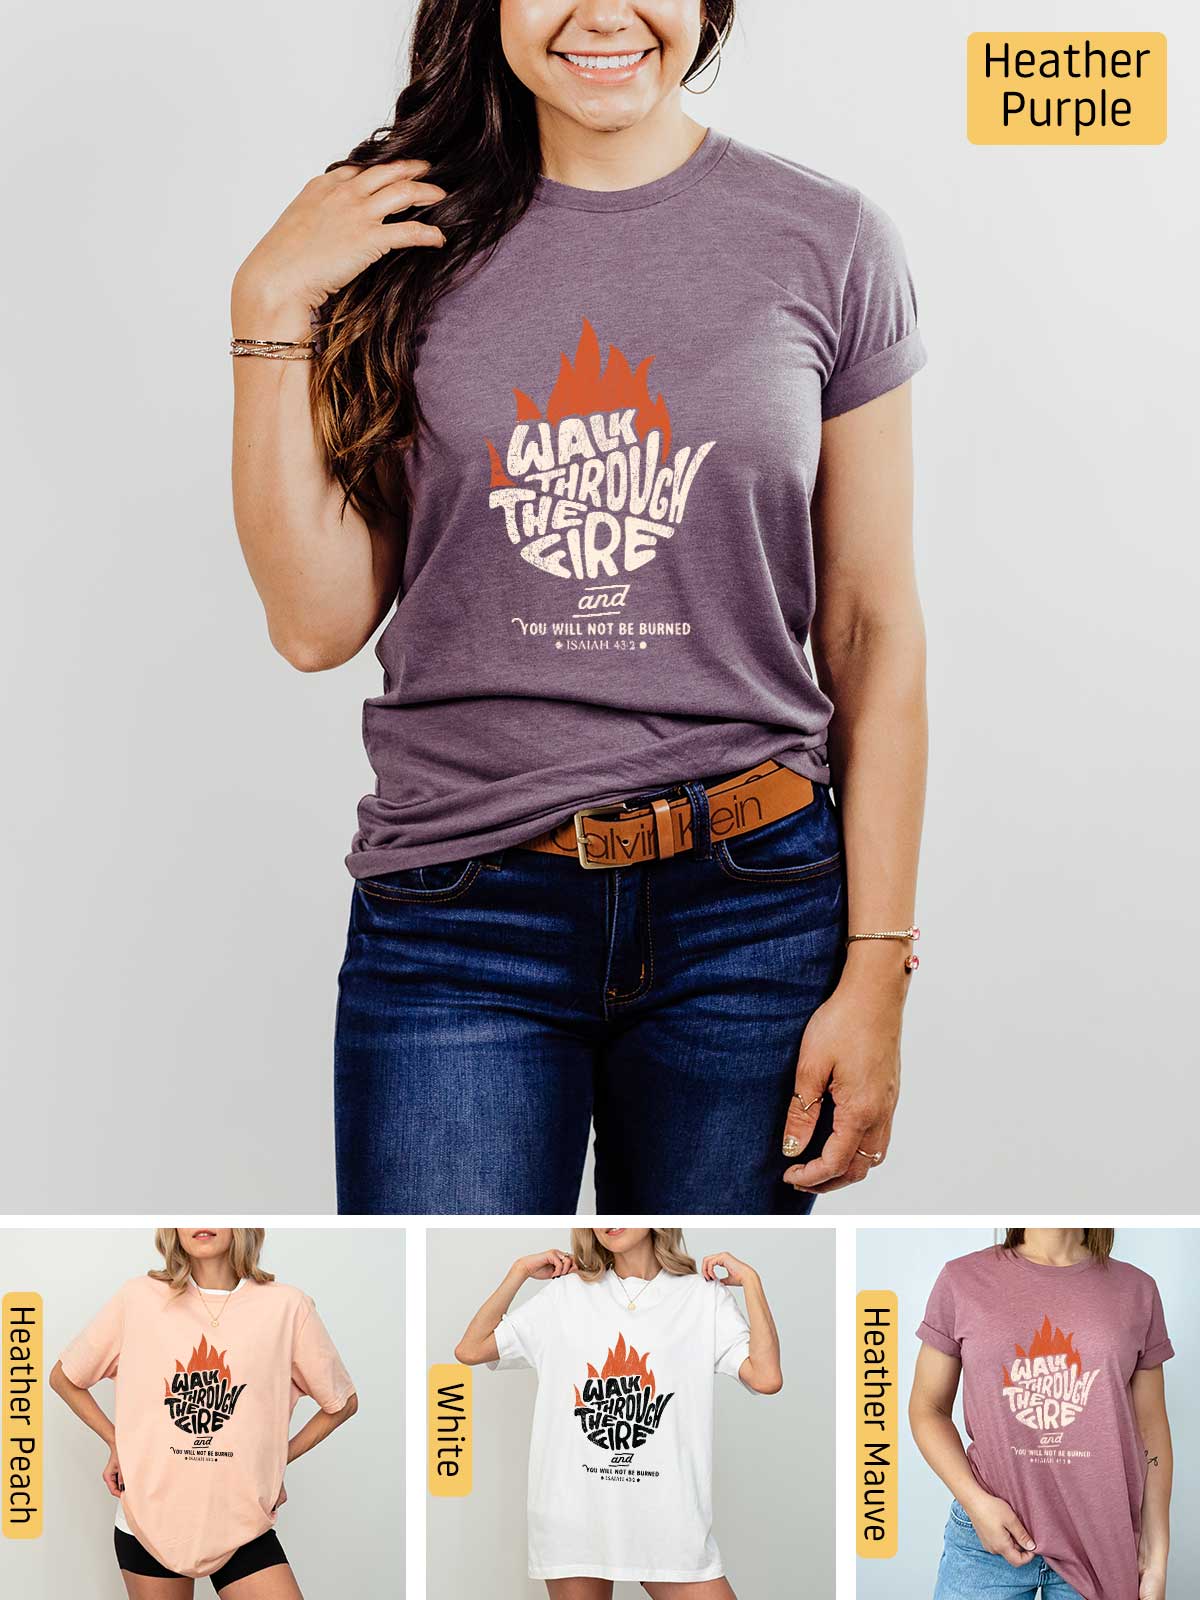 a woman wearing a t - shirt with a campfire design on it